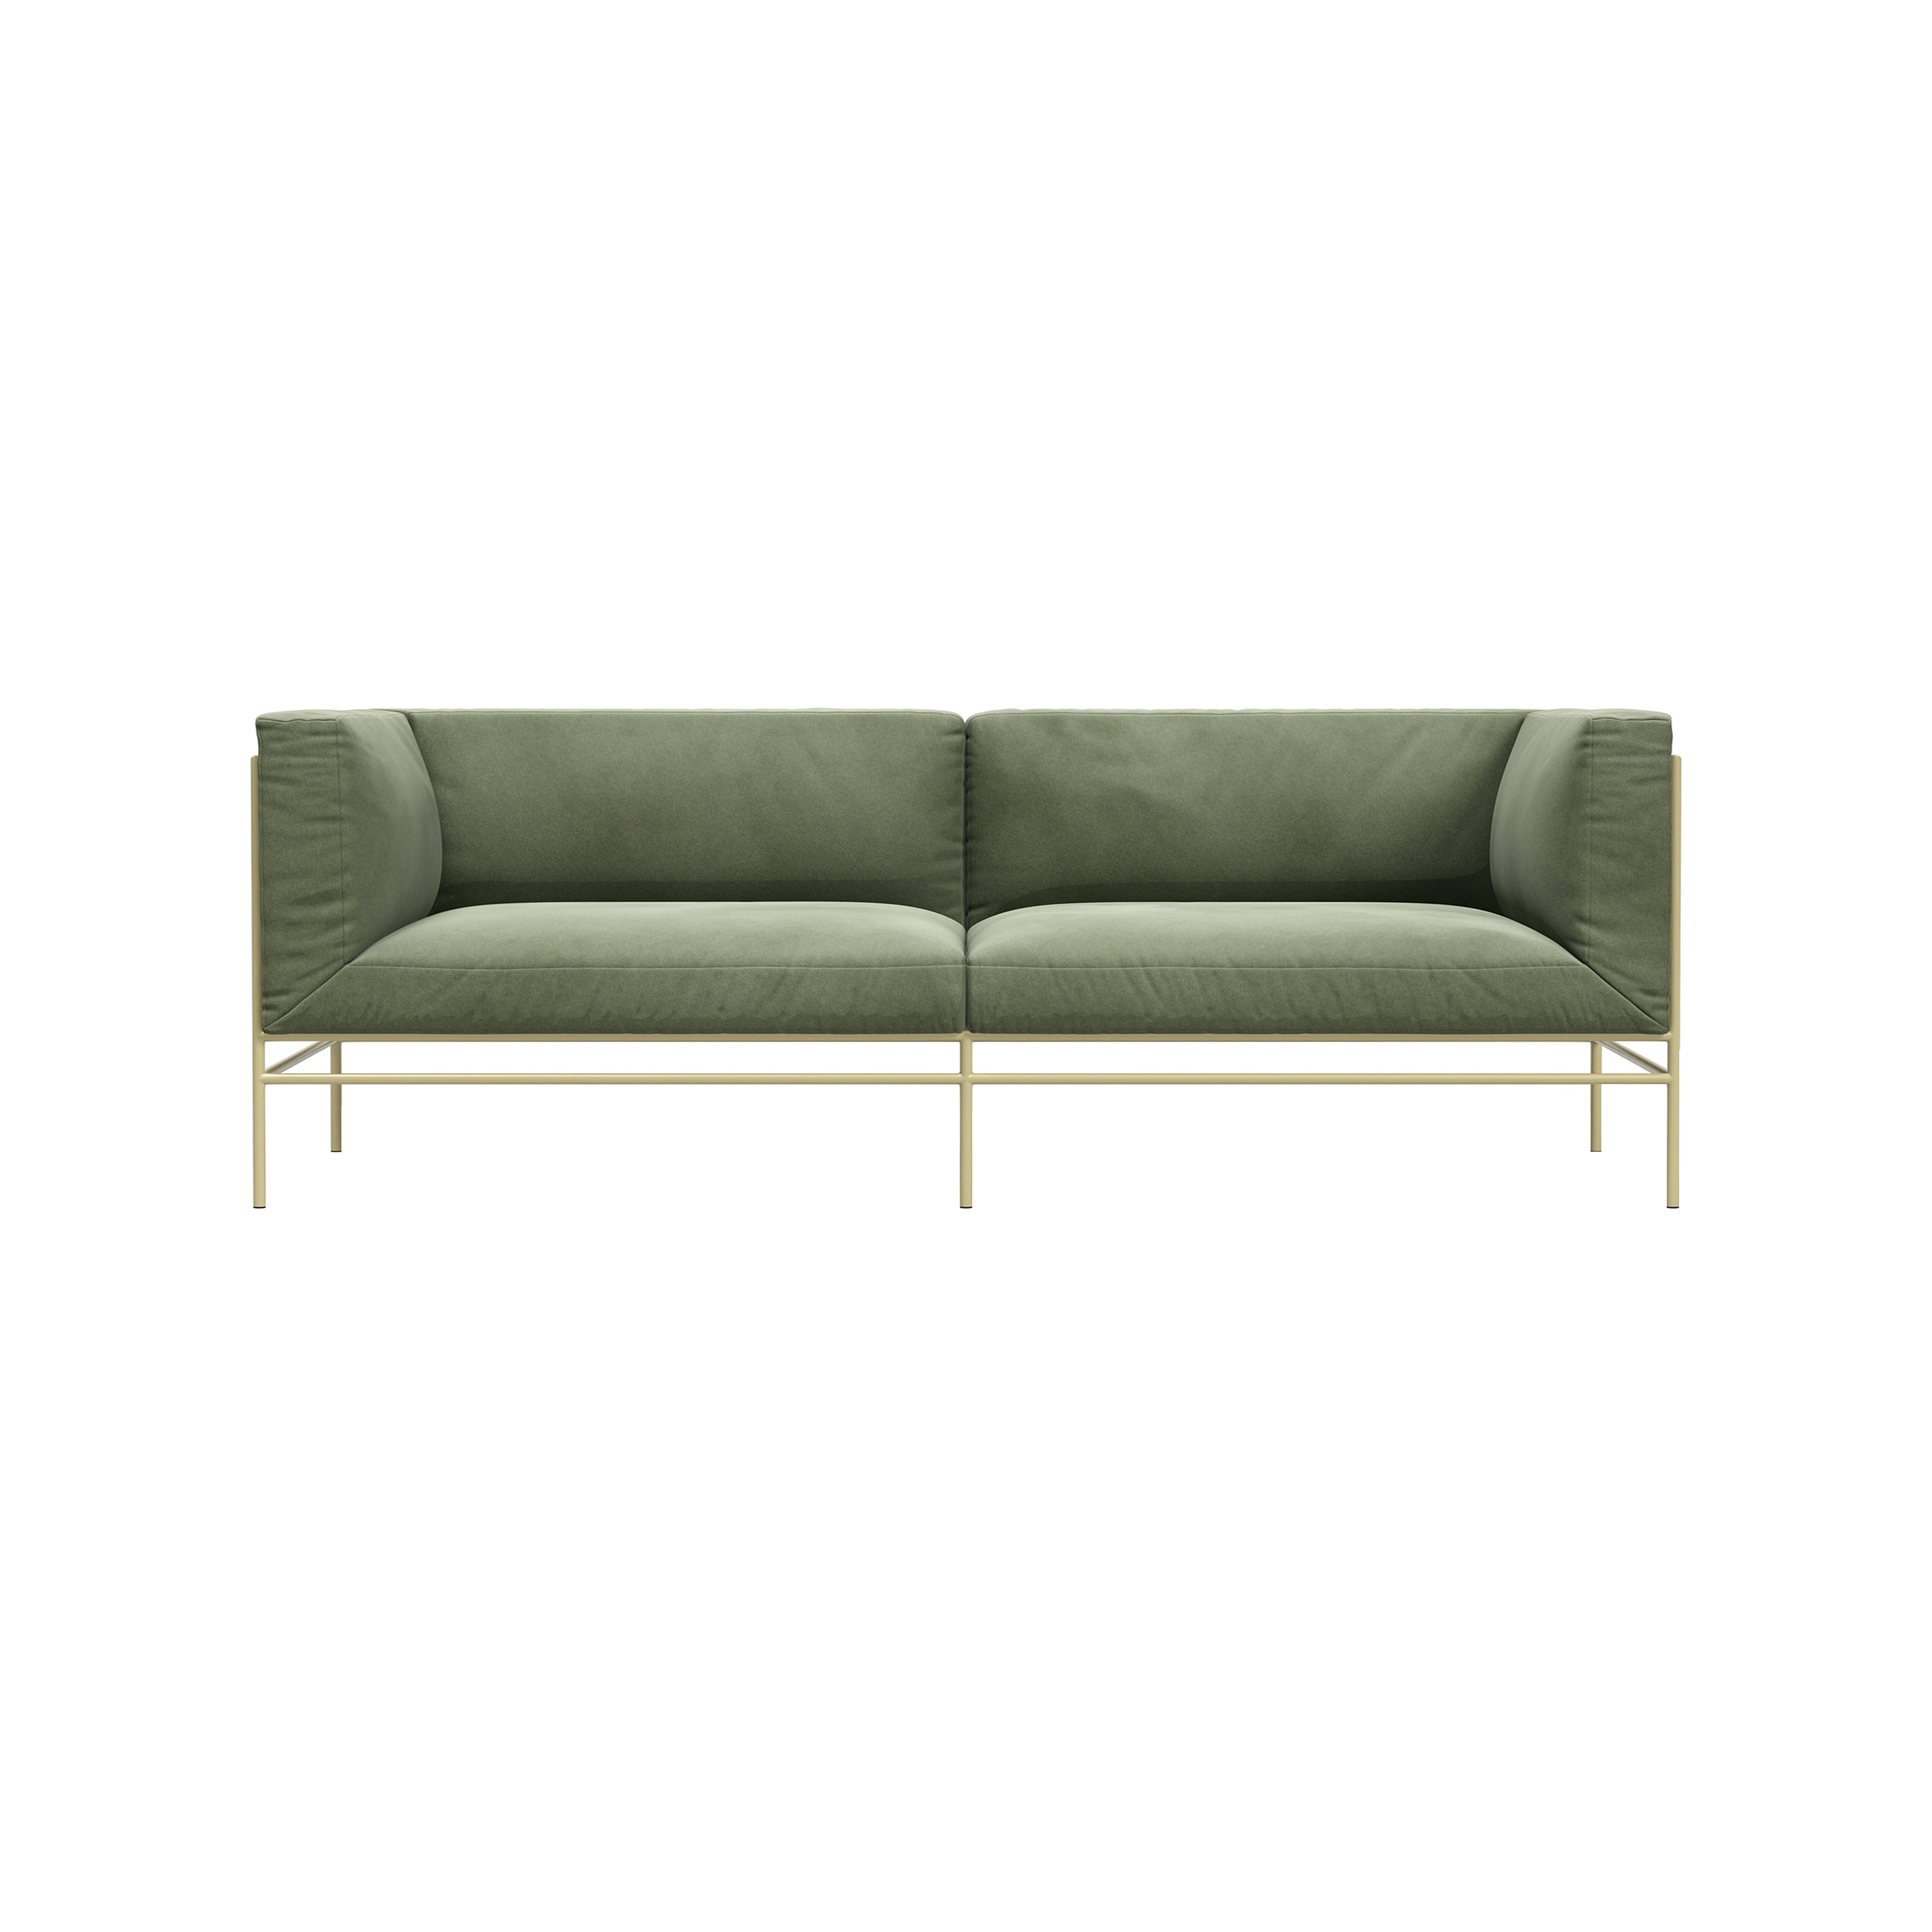 Middleweight Sofa: 2 + Champagne